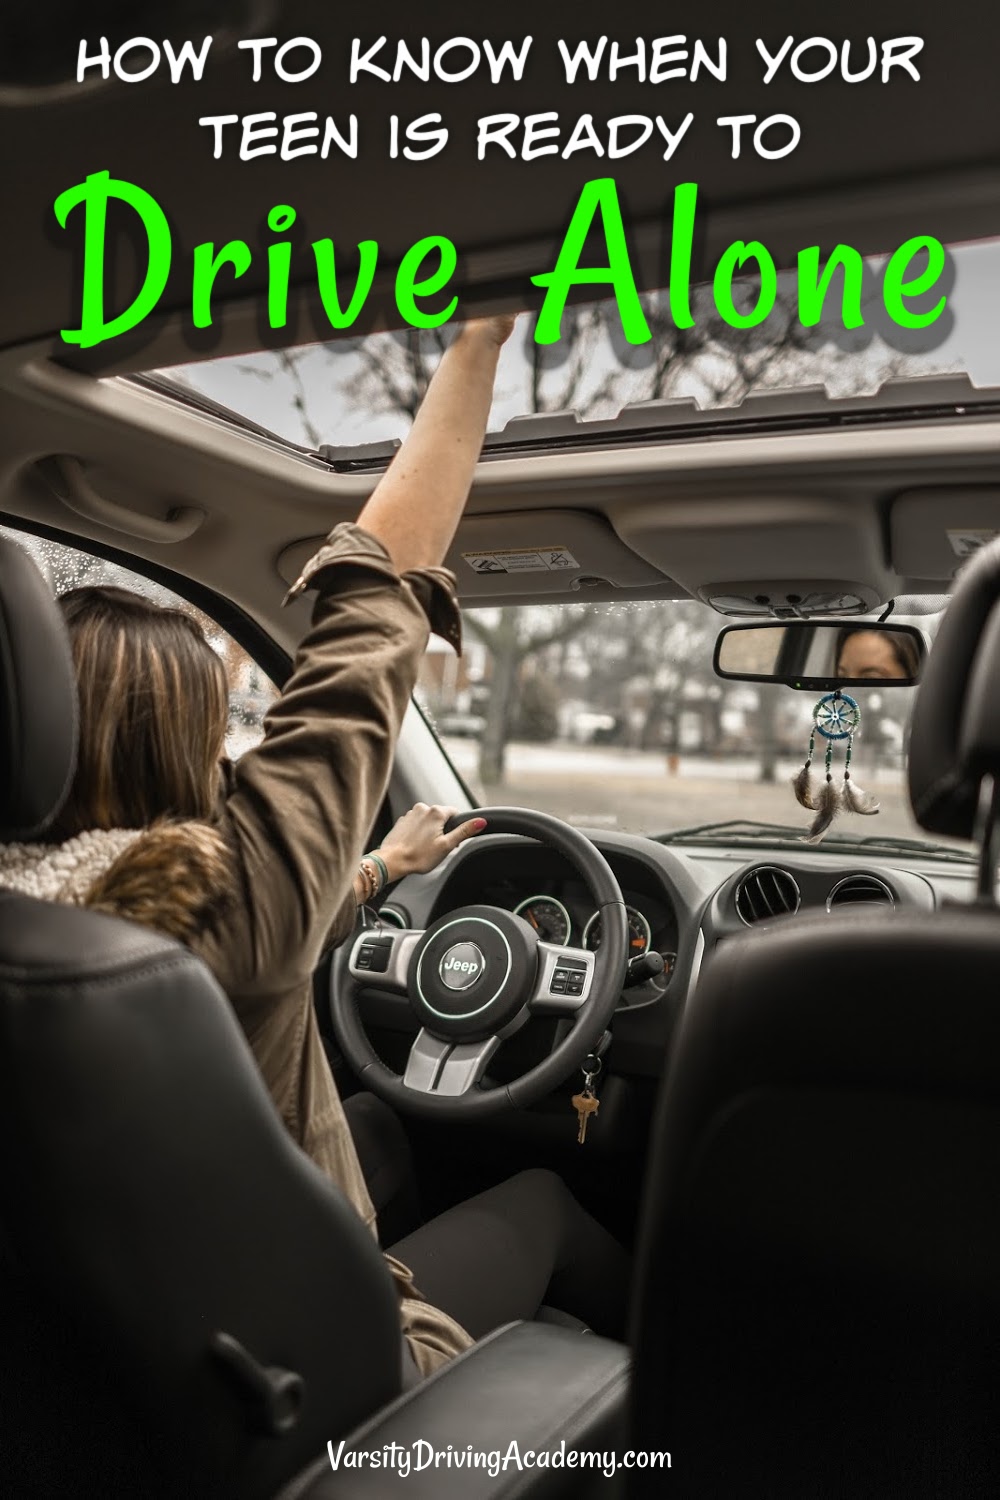 The best tips your teen is ready to drive alone can help you feel a little better knowing they are handling this responsibility well.